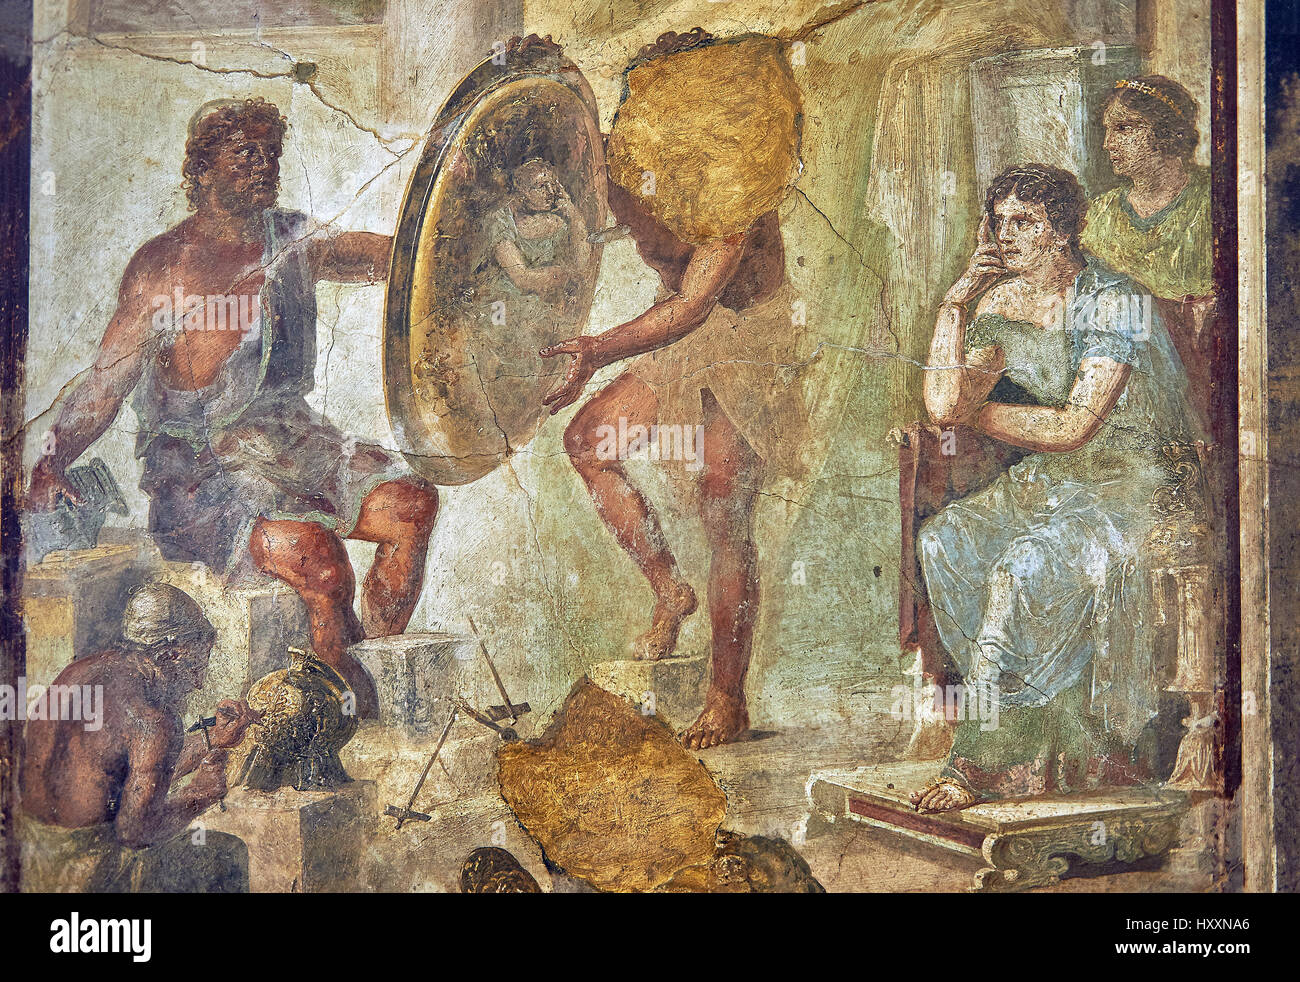 Roman fresco wall painting of Thetsis looking at her reflection in a golden shield that Hephaistos has made for Achilles,Pompeii IX 1.7, inv 9529, Nap Stock Photo